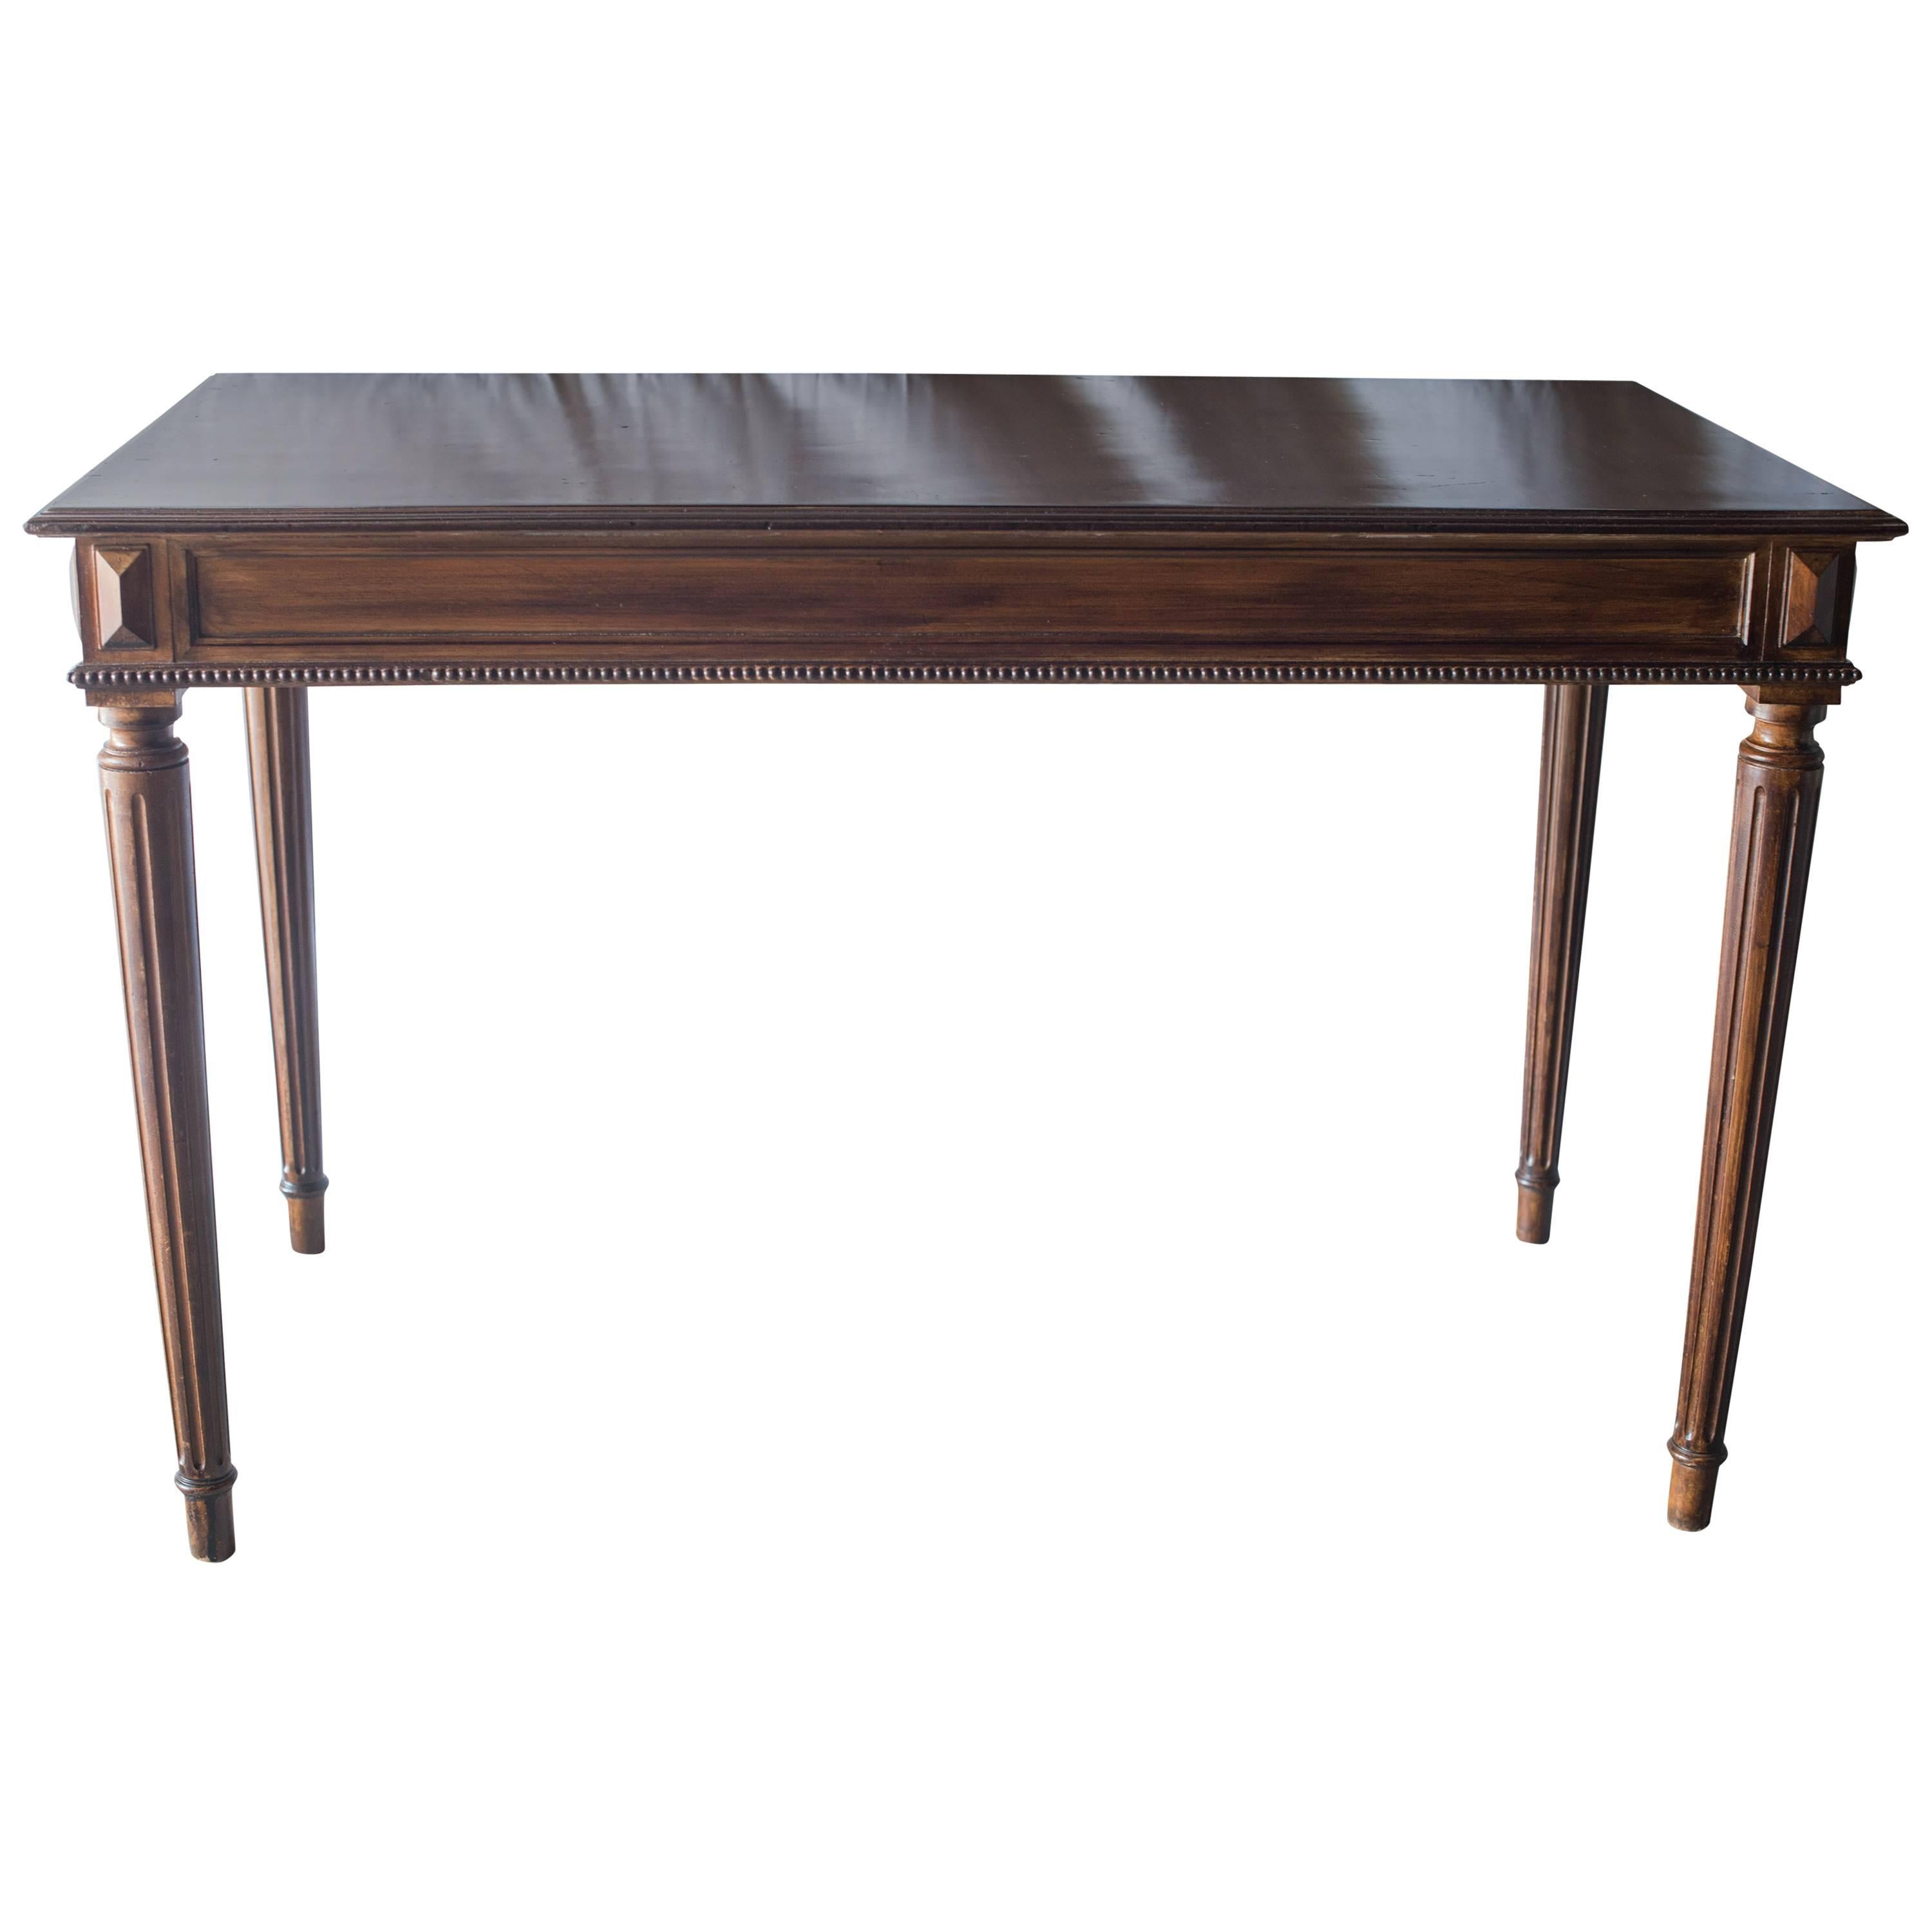 Late 19th Century Neoclassical Style Writing Table